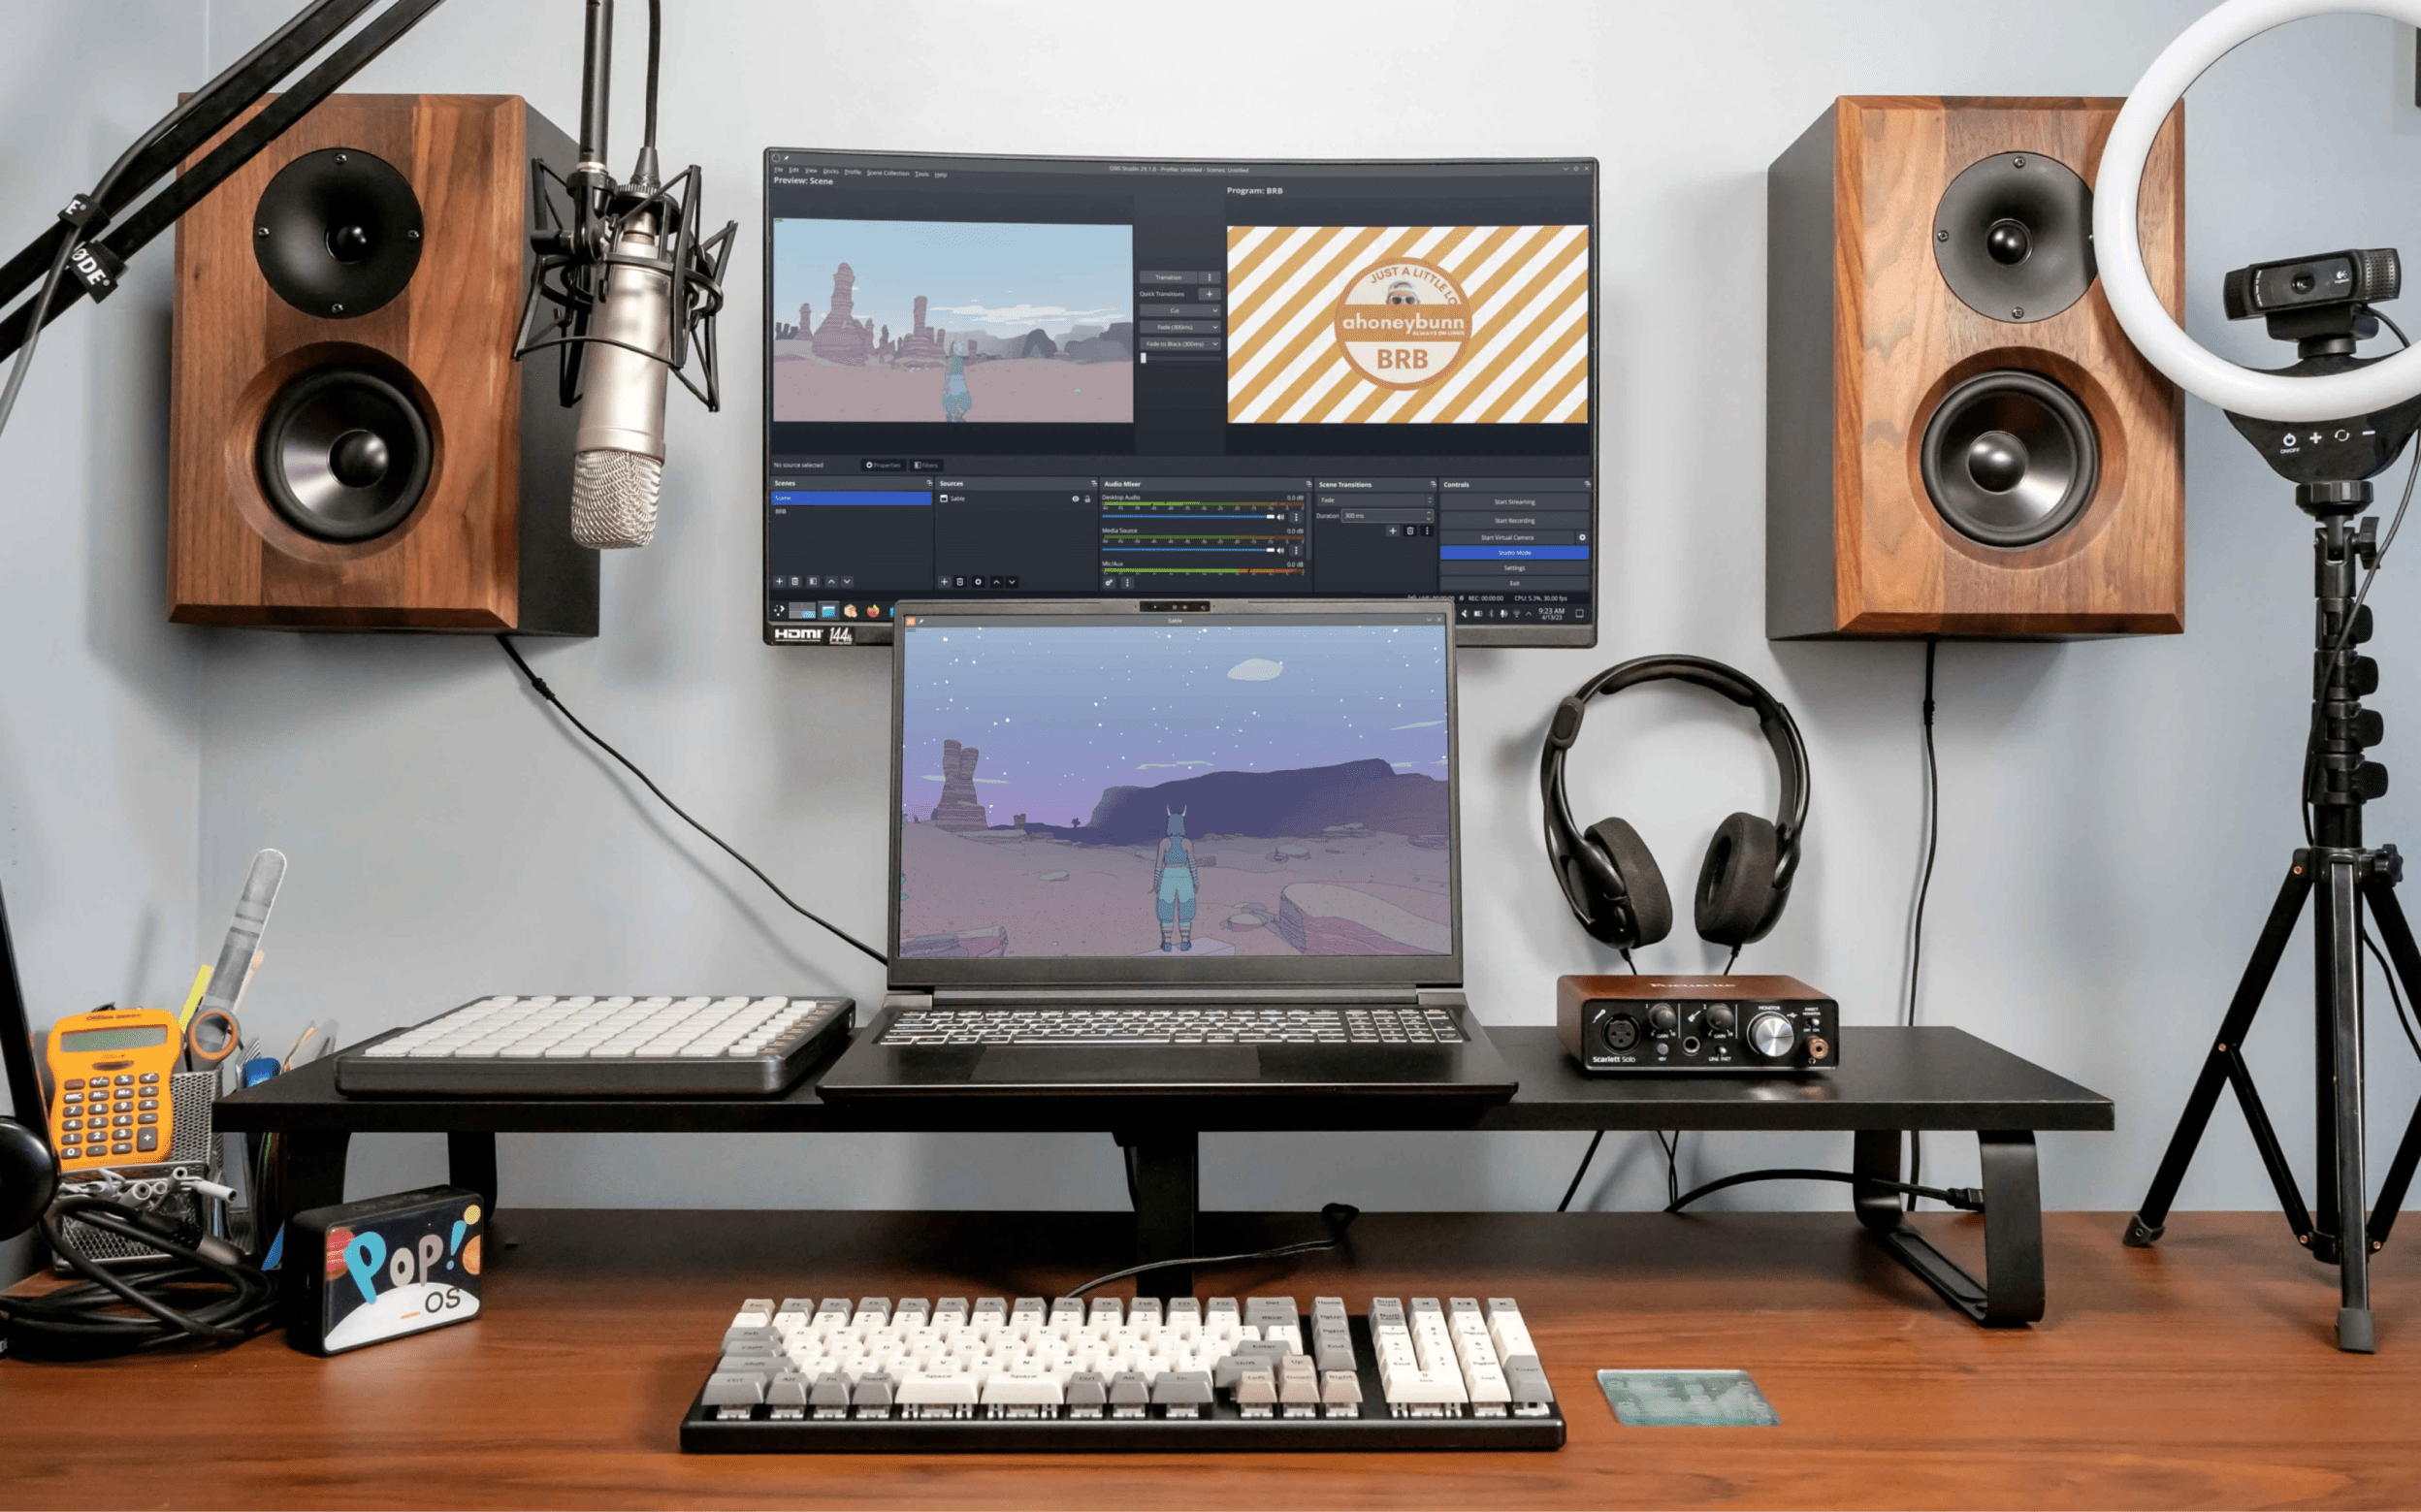 The Oryx Pro with  16:10 display sits on a video game streamer's desk.